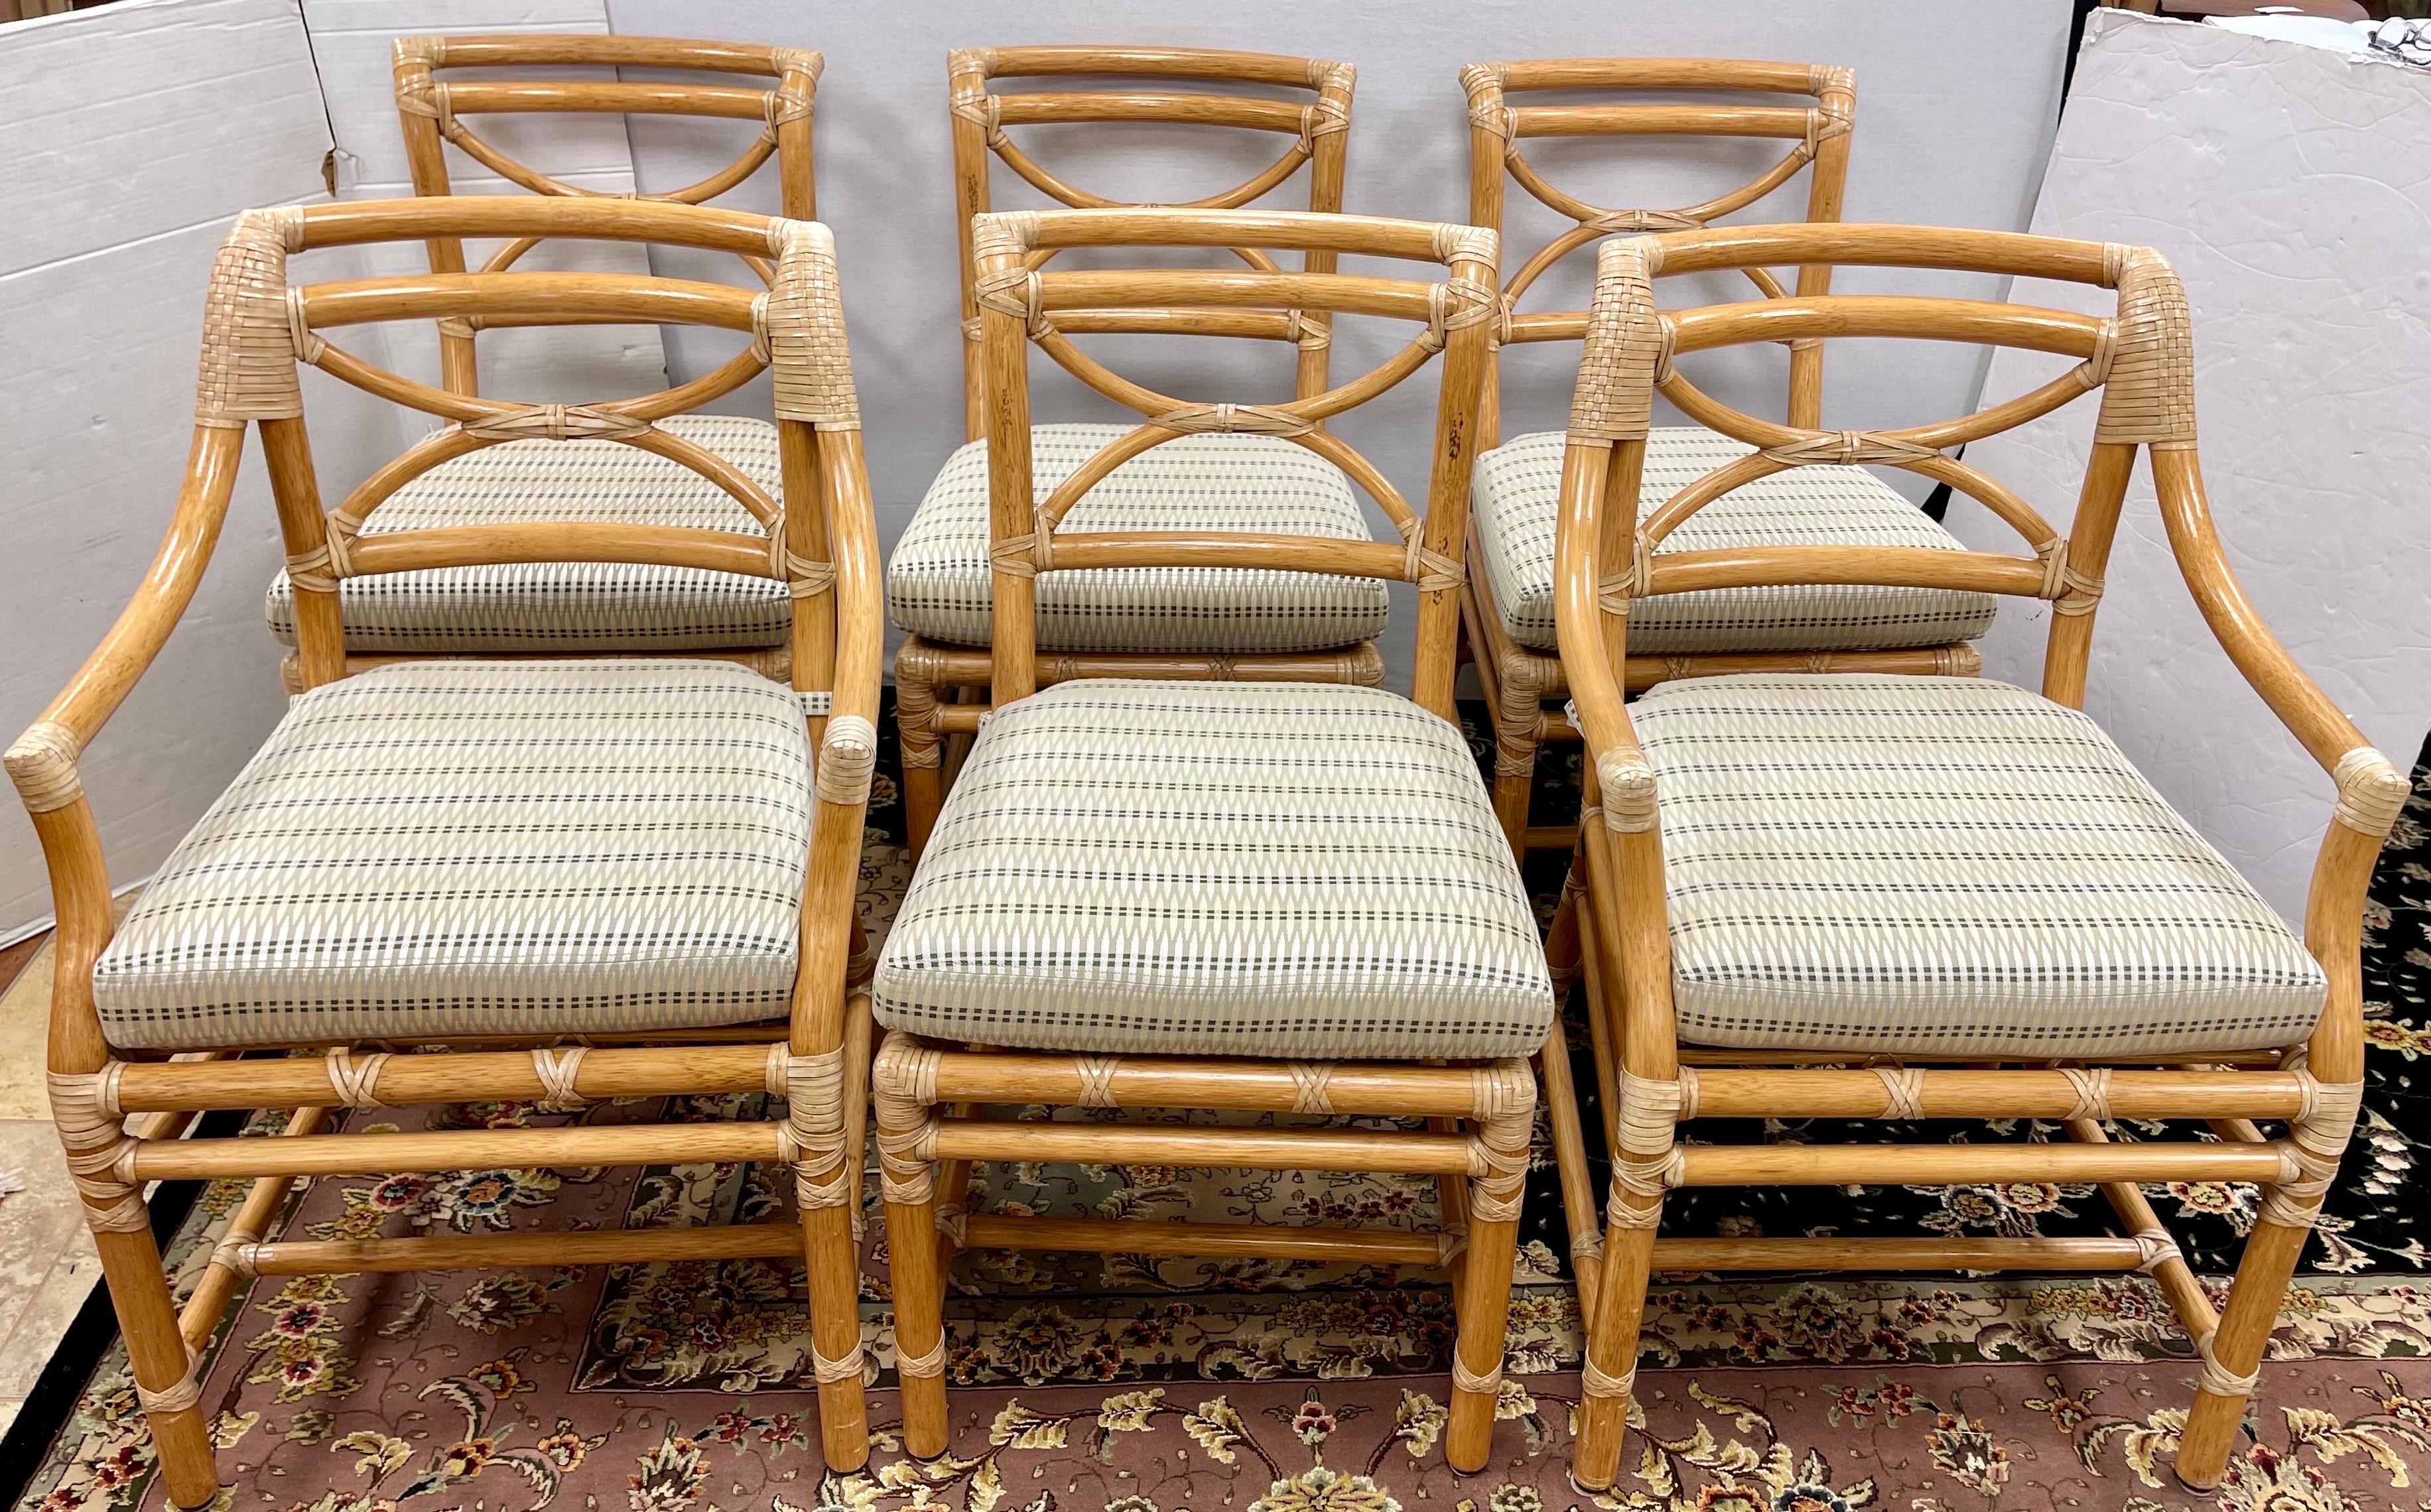 Magnificent set of six McGuire rattan dining chairs designed by Elinor McGuire. The set consists of two armchairs or host chairs and four side chairs in great condition. The chairs have an abundance of leather rawhide laces on the exposed joints.